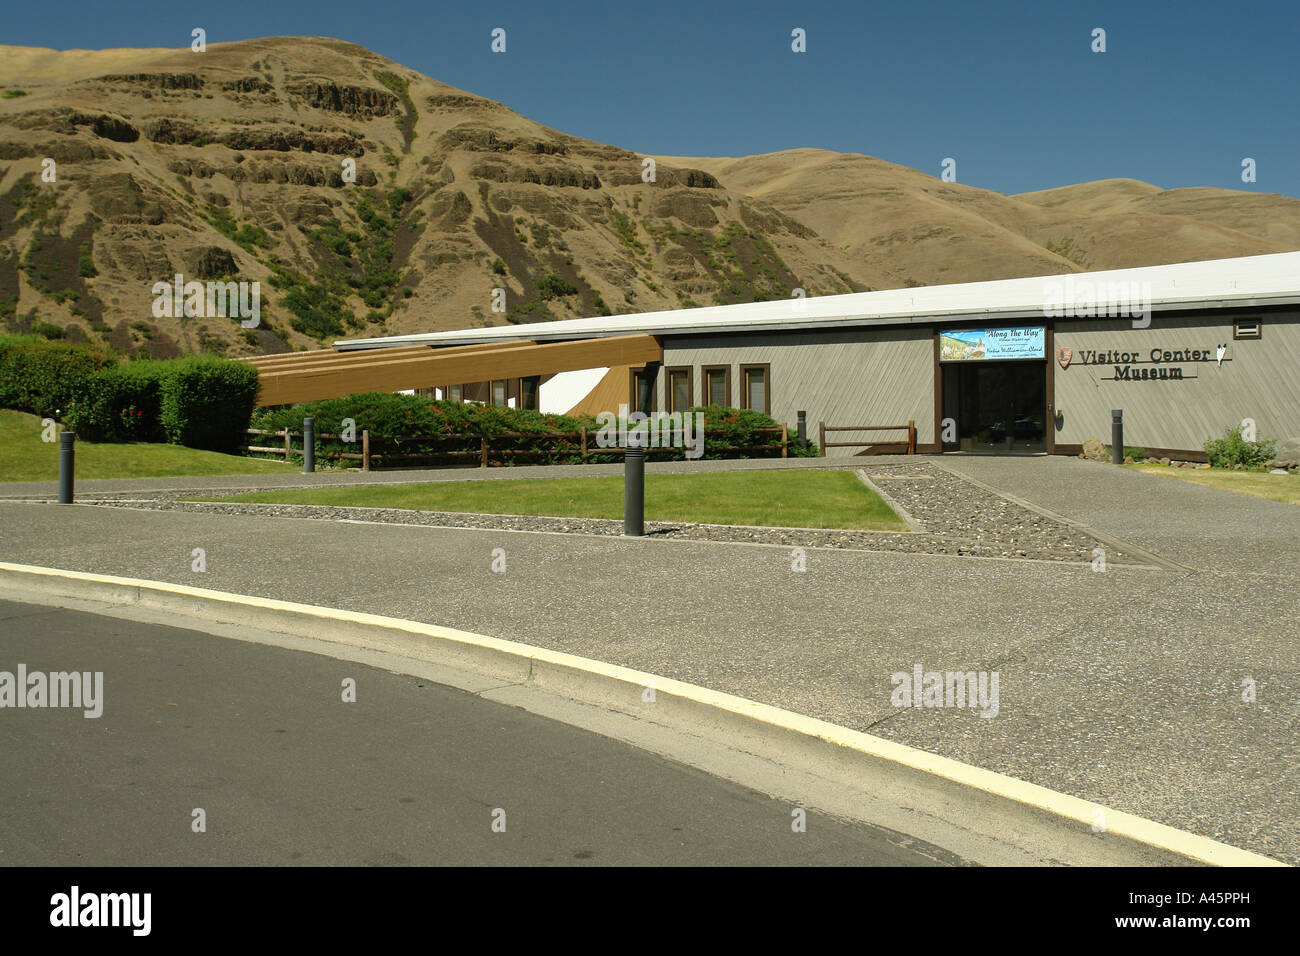 AJD56201, Spalding, ID, Idaho, Nez Perce National Historical Park Visitor Center, il museo Foto Stock